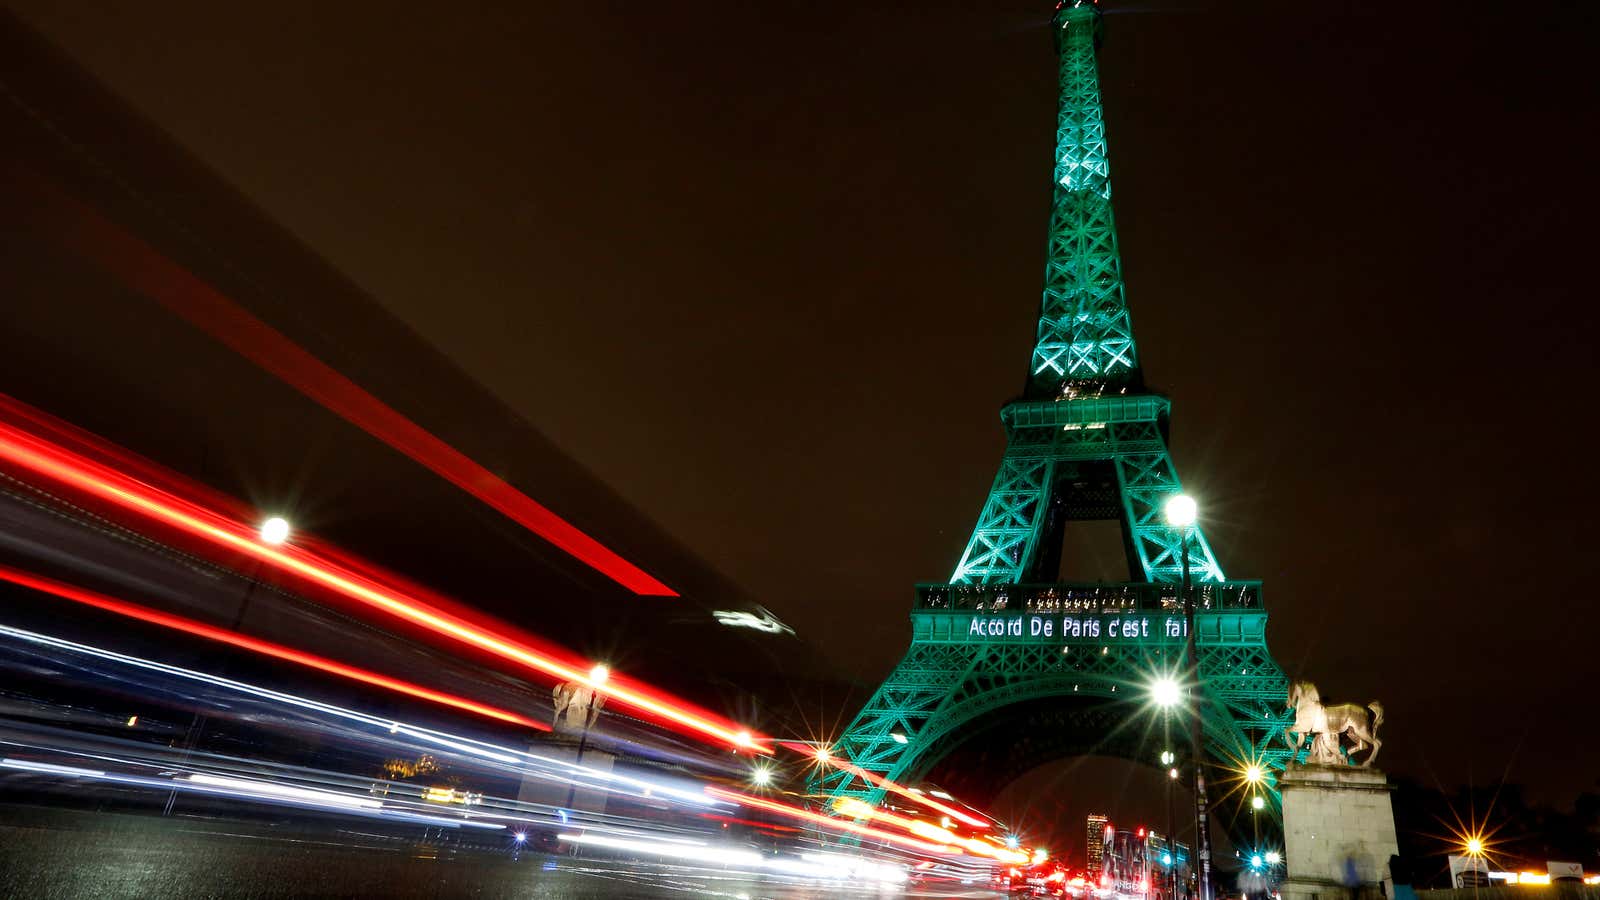 Monuments in Paris were illuminated to celebrate the adoption of the Paris Agreement on climate change.